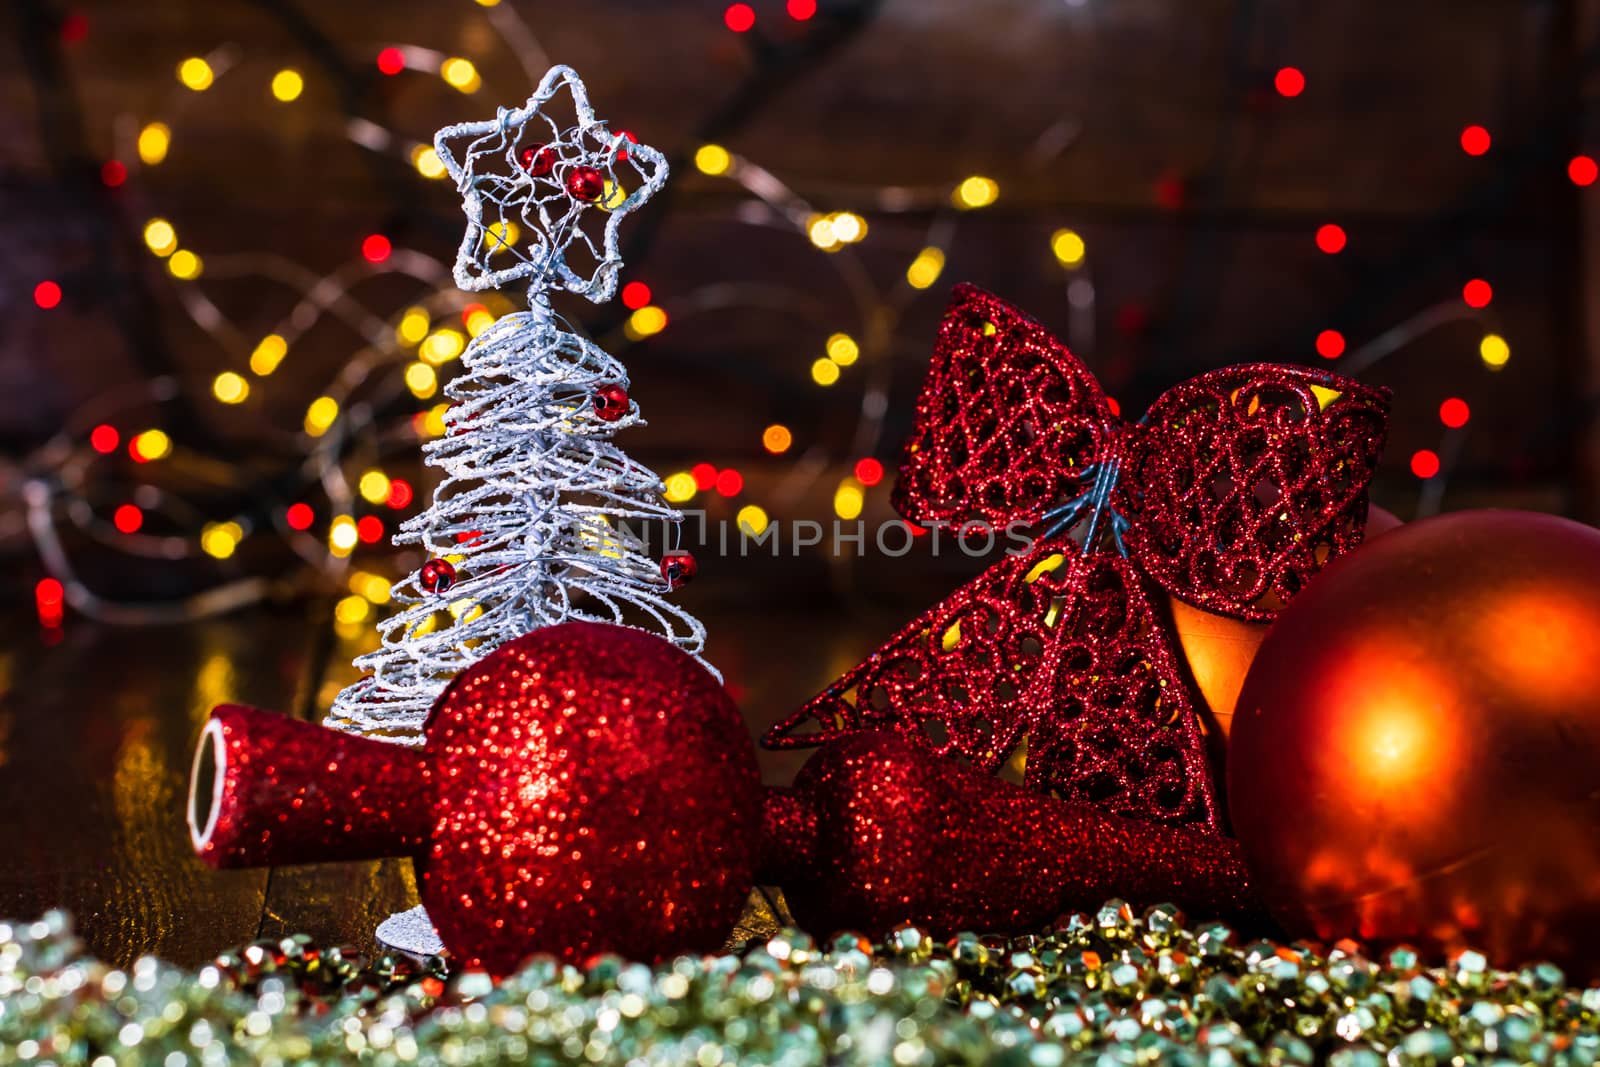 Decorations and ornaments in a colorful Christmas composition is by vladispas